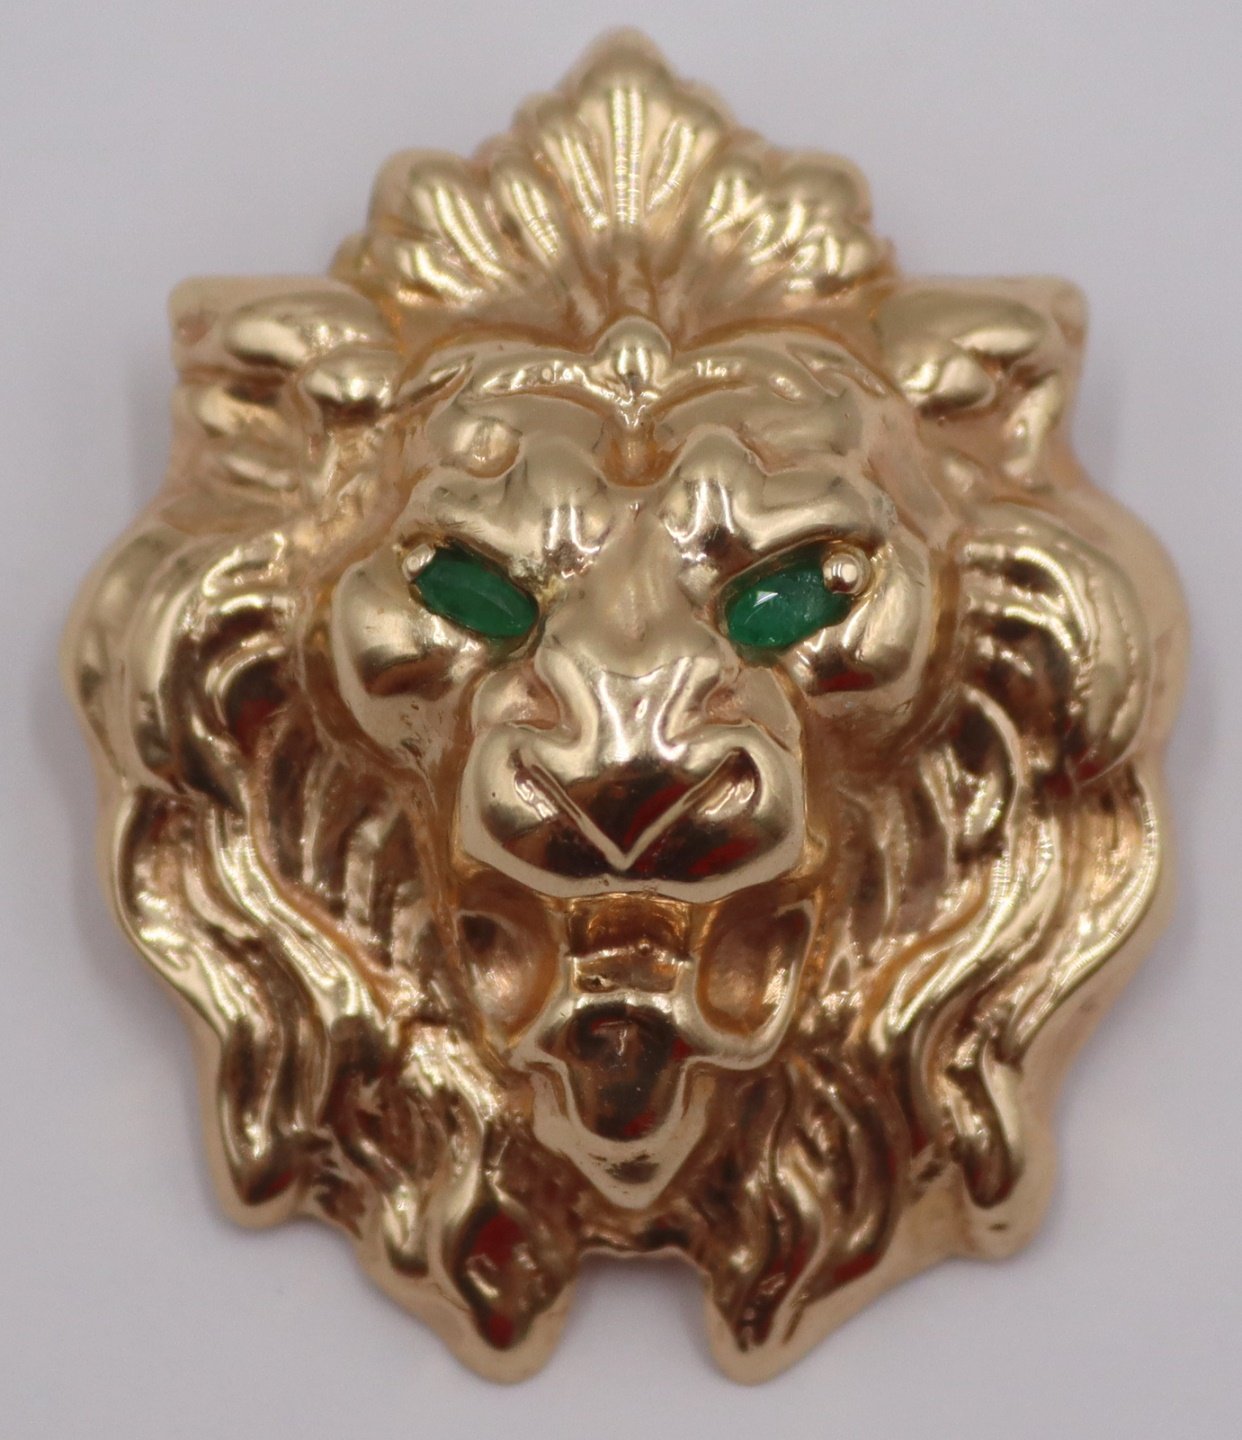 JEWELRY. 14KT GOLD & EMERALD LION'S